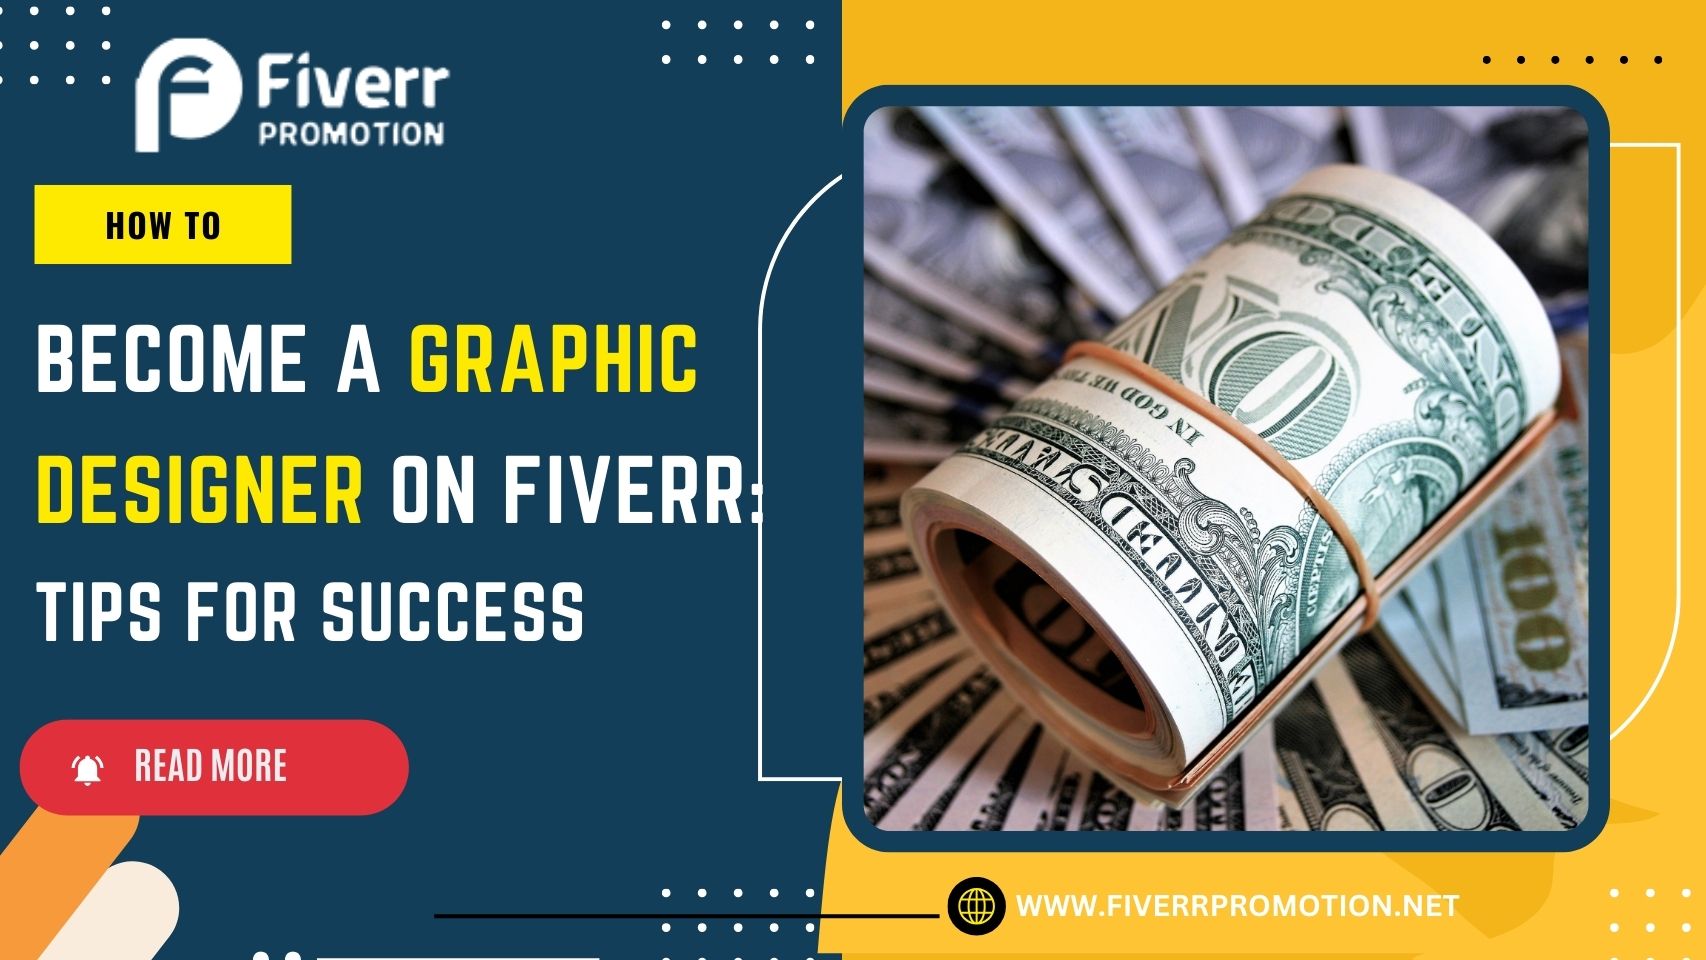 How to Become a Graphic Designer on Fiverr: Tips for Success